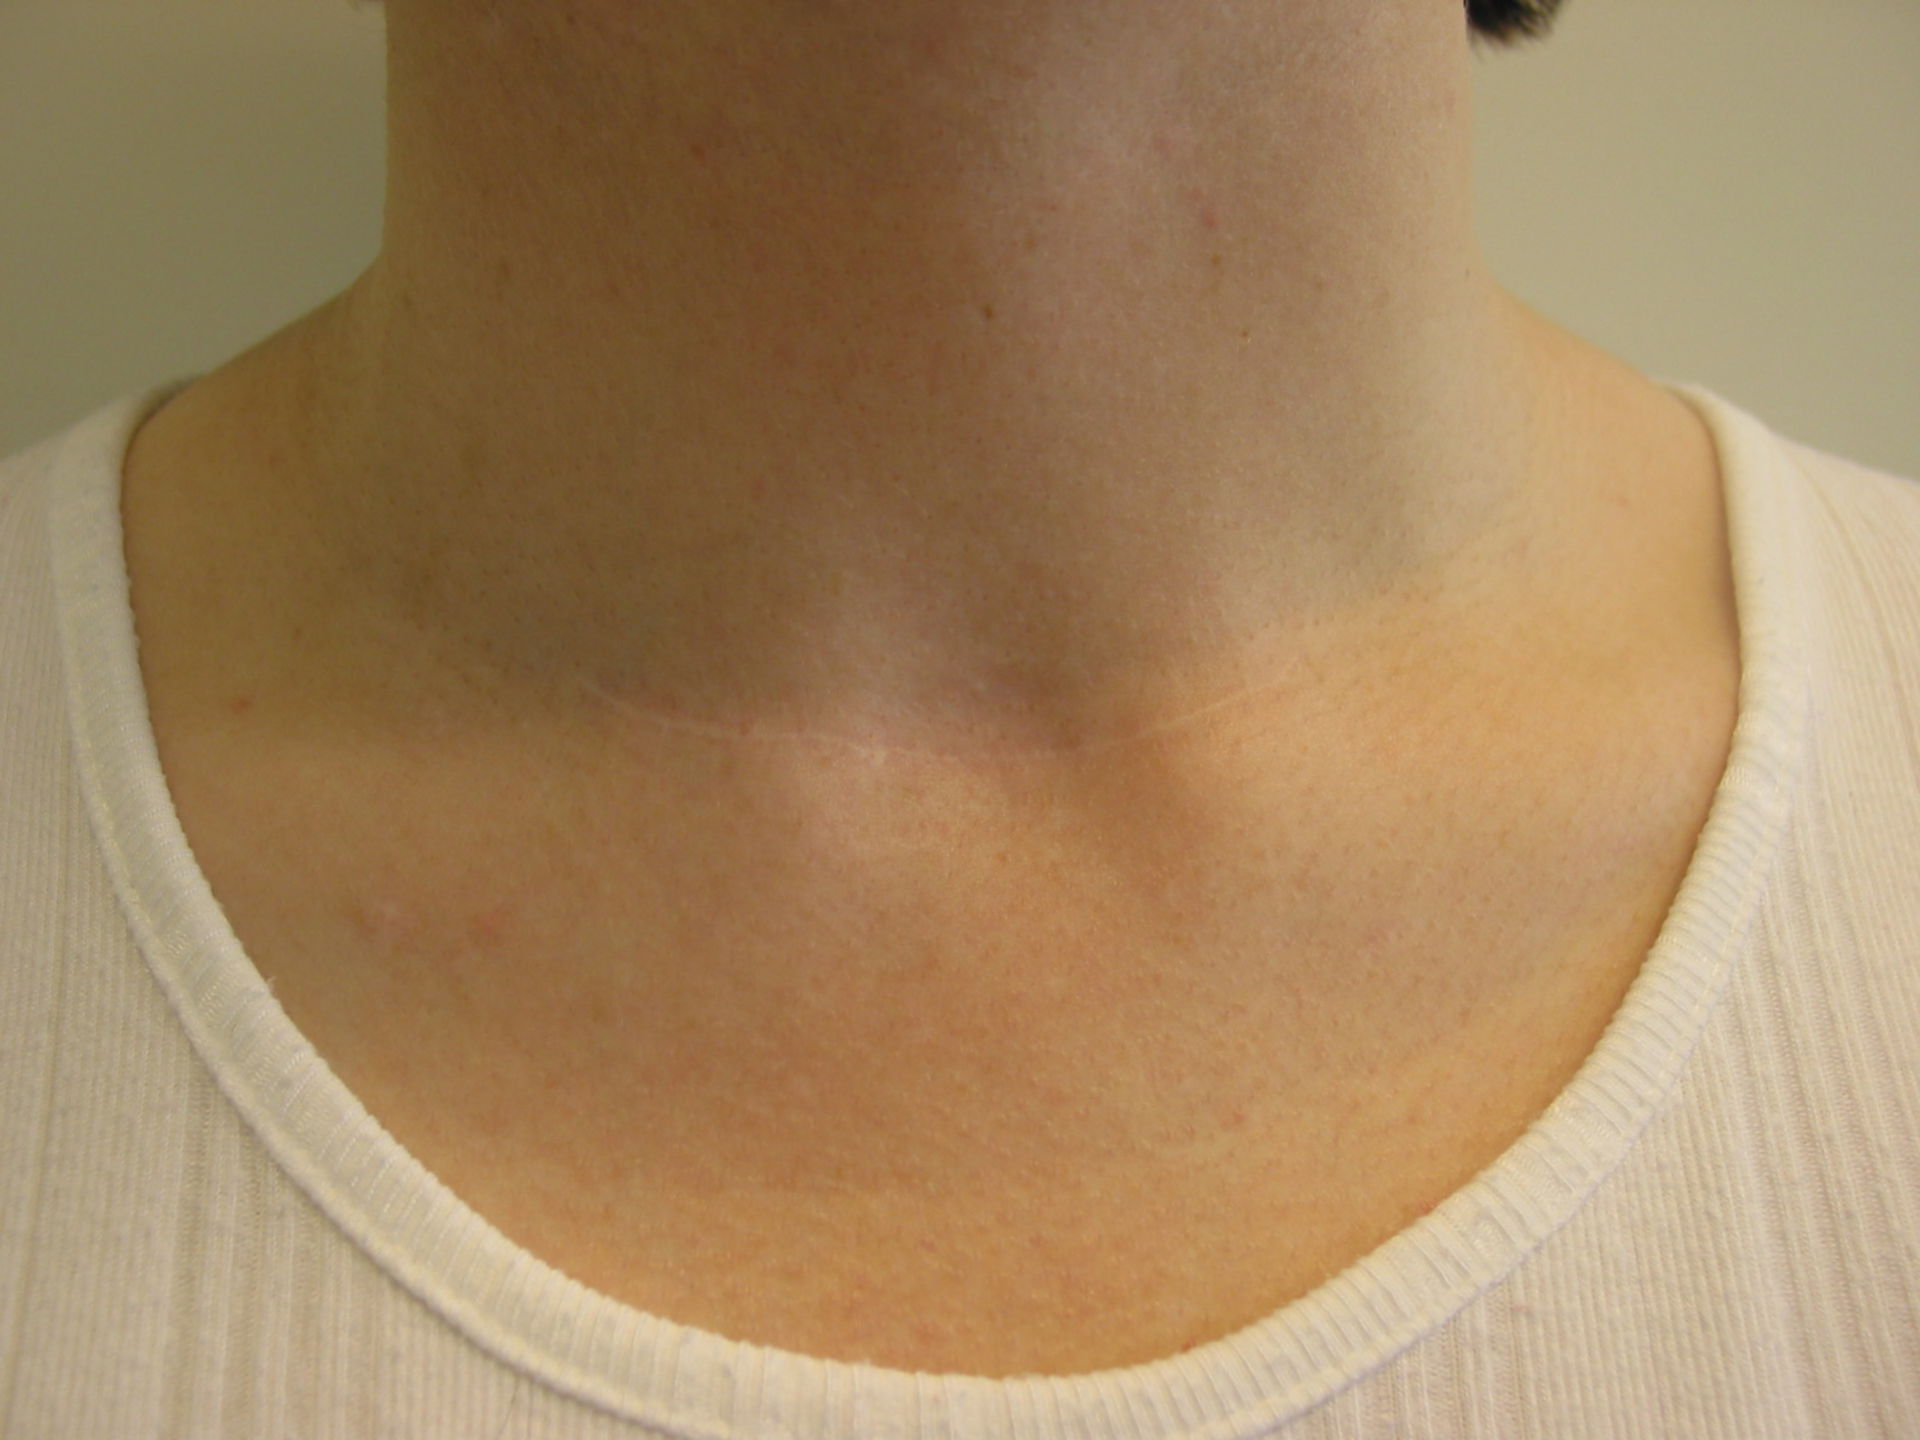 State after thyroid surgery; 6 months after surgery